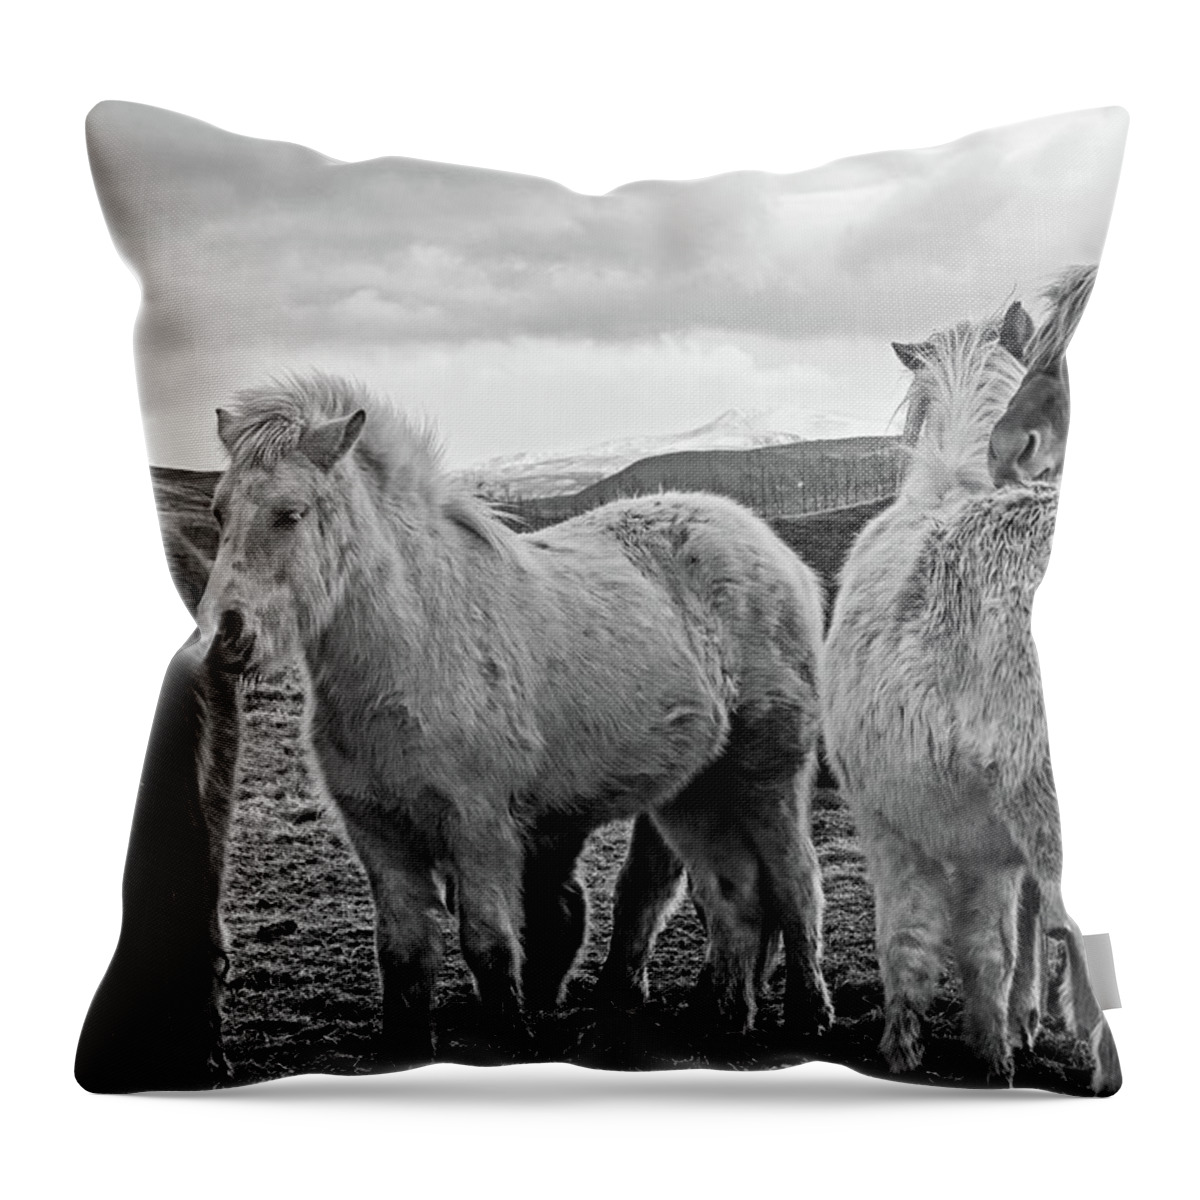 Iceland Throw Pillow featuring the photograph Icelandic Horse Cuddle Iceland Black and White by Toby McGuire